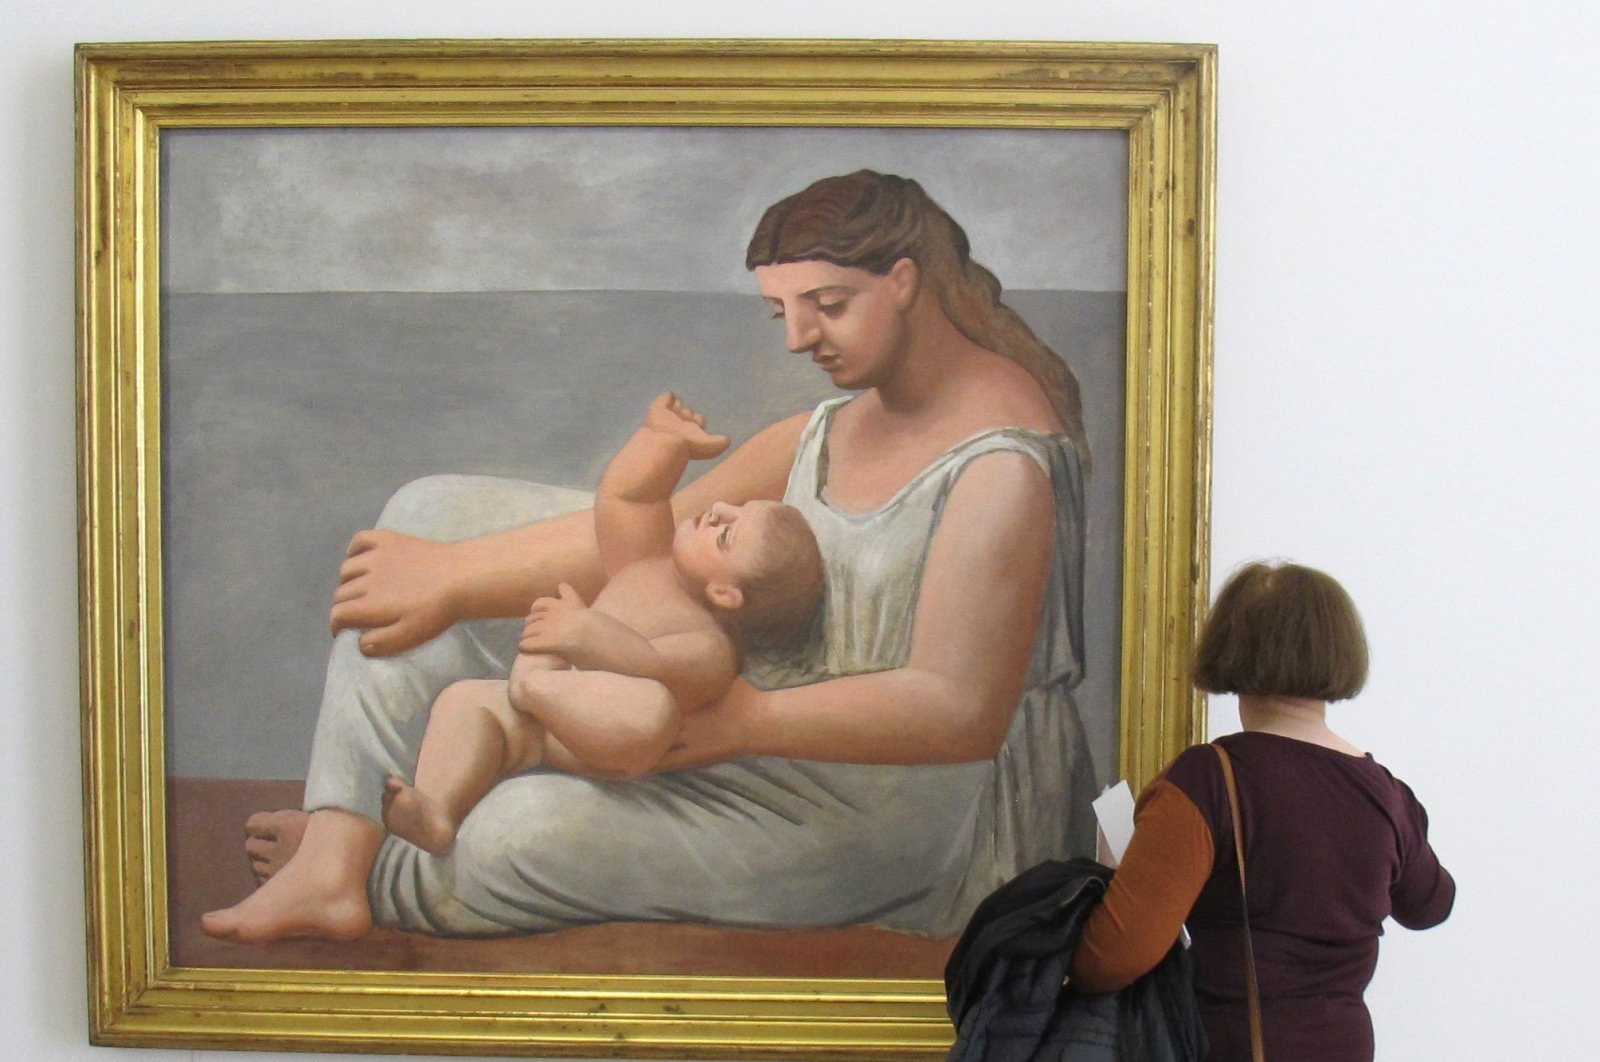 A visitor examines "Mother and Child" by Pablo Picasso in the Musee Picasso, Paris, France. (DPA Photo)